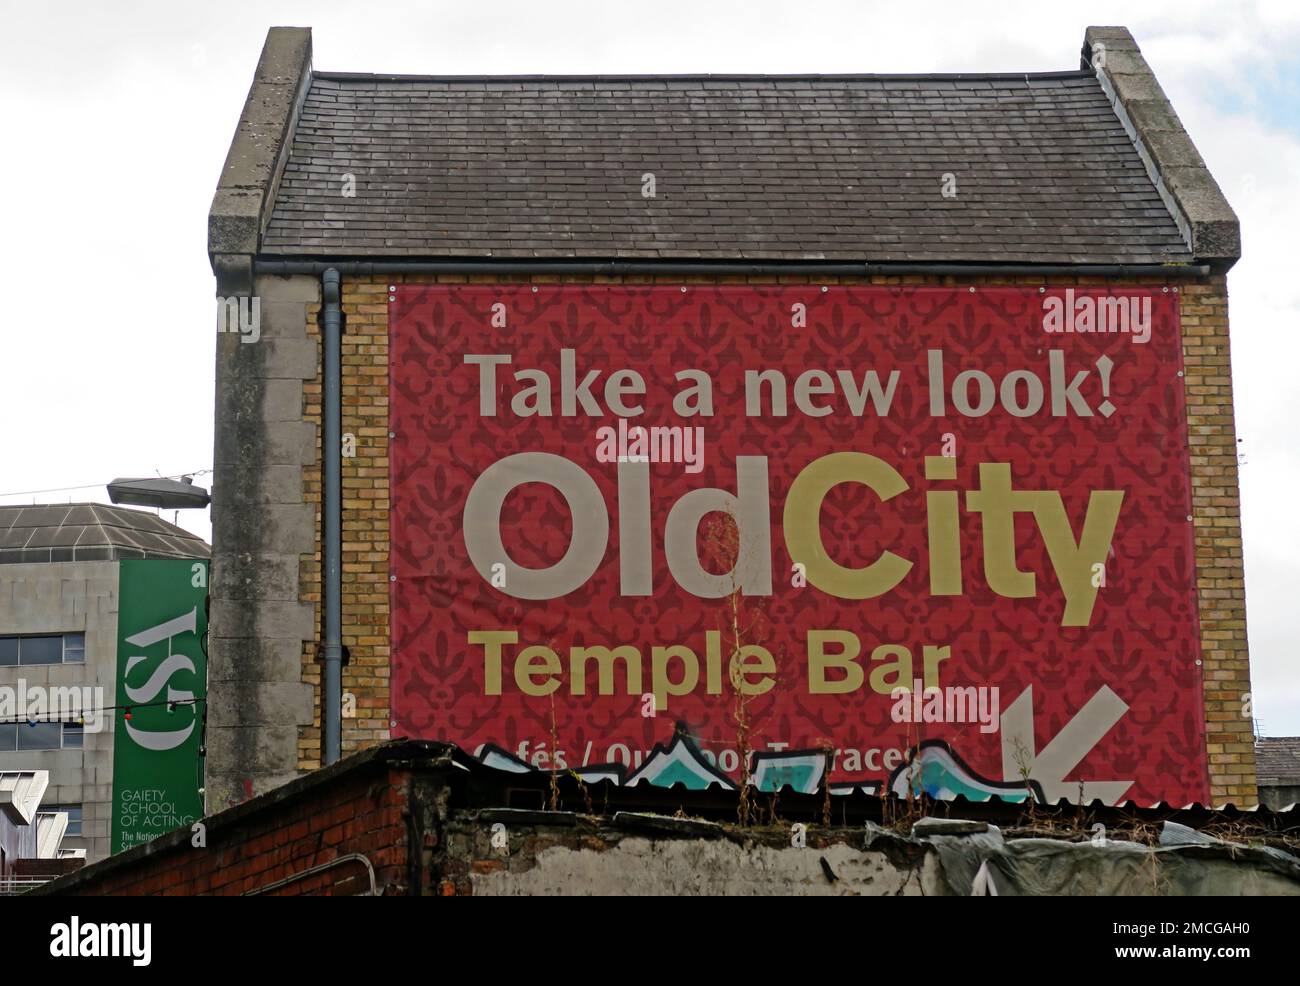 Take a new look, Old City, Essex St West, Temple Bar, Dublin, Eire, Ireland Stock Photo